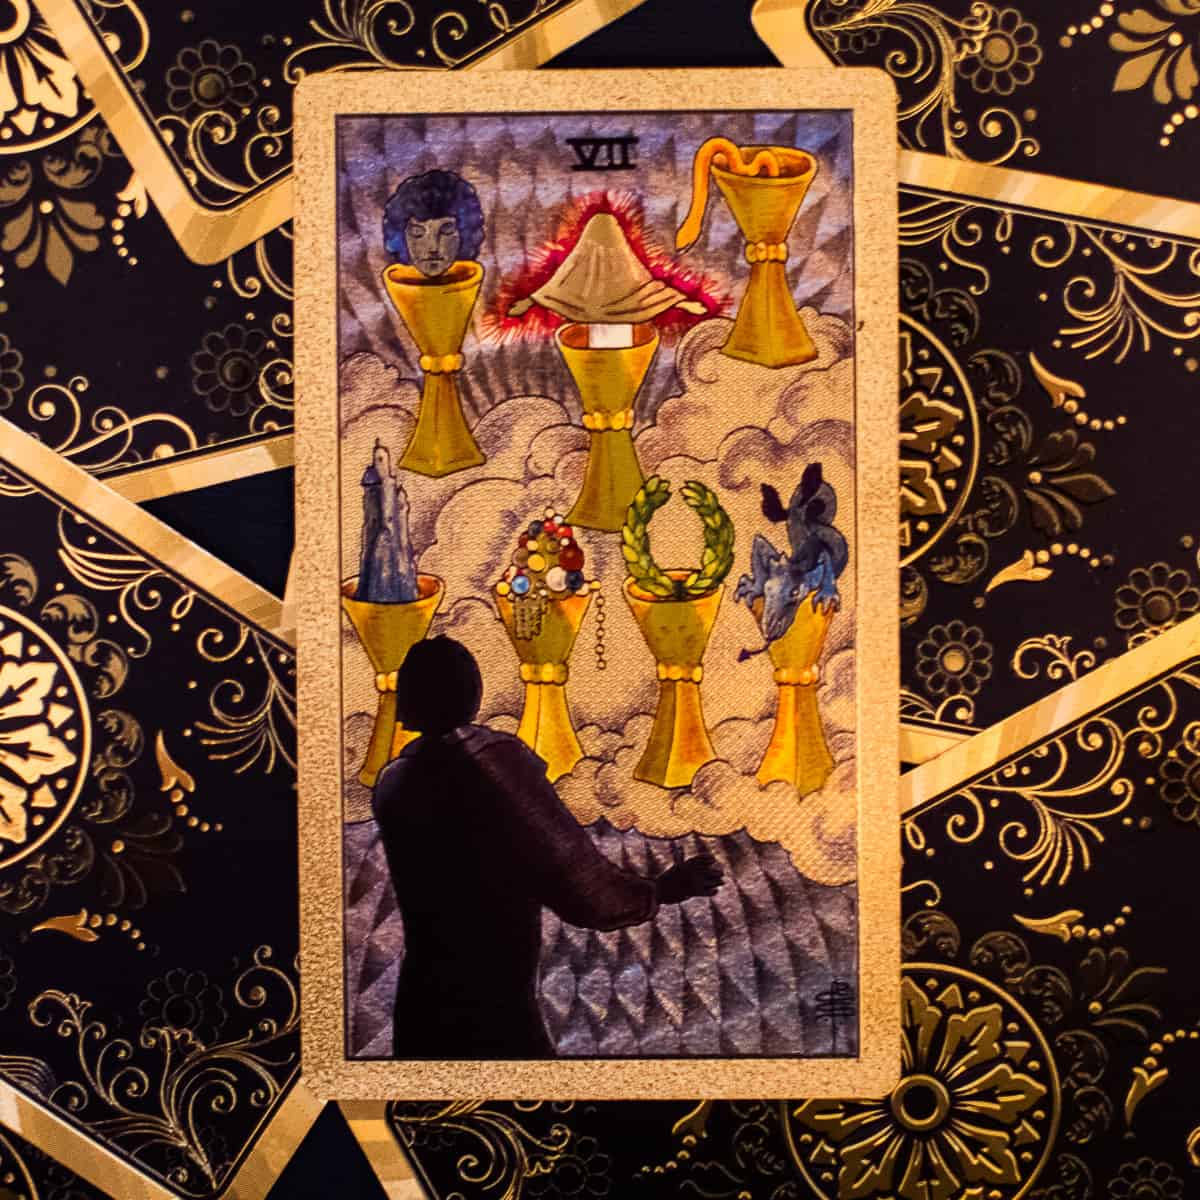 Seven various cups for choosing depicted on a tarot card.